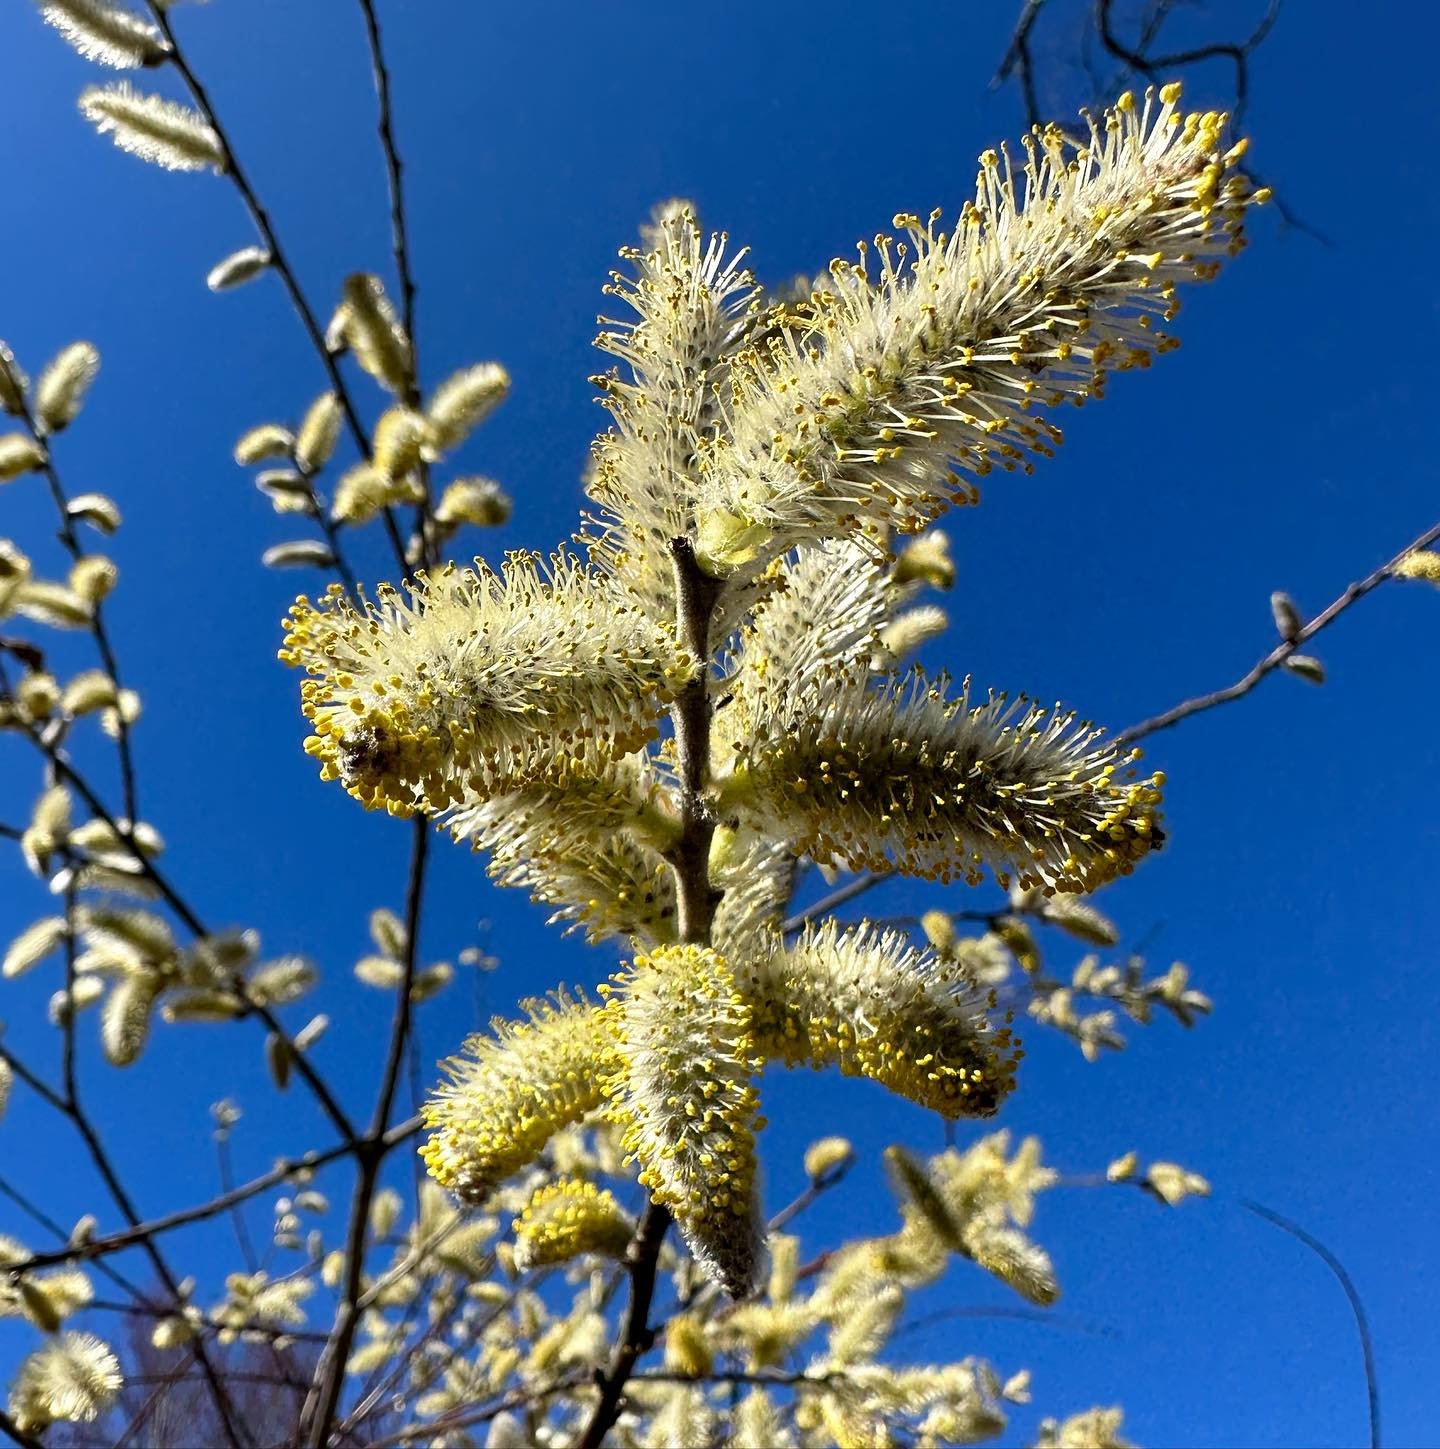 Willow in bloom on a cool crisp day 🌼

#salixdiscolor #wildbotanicals